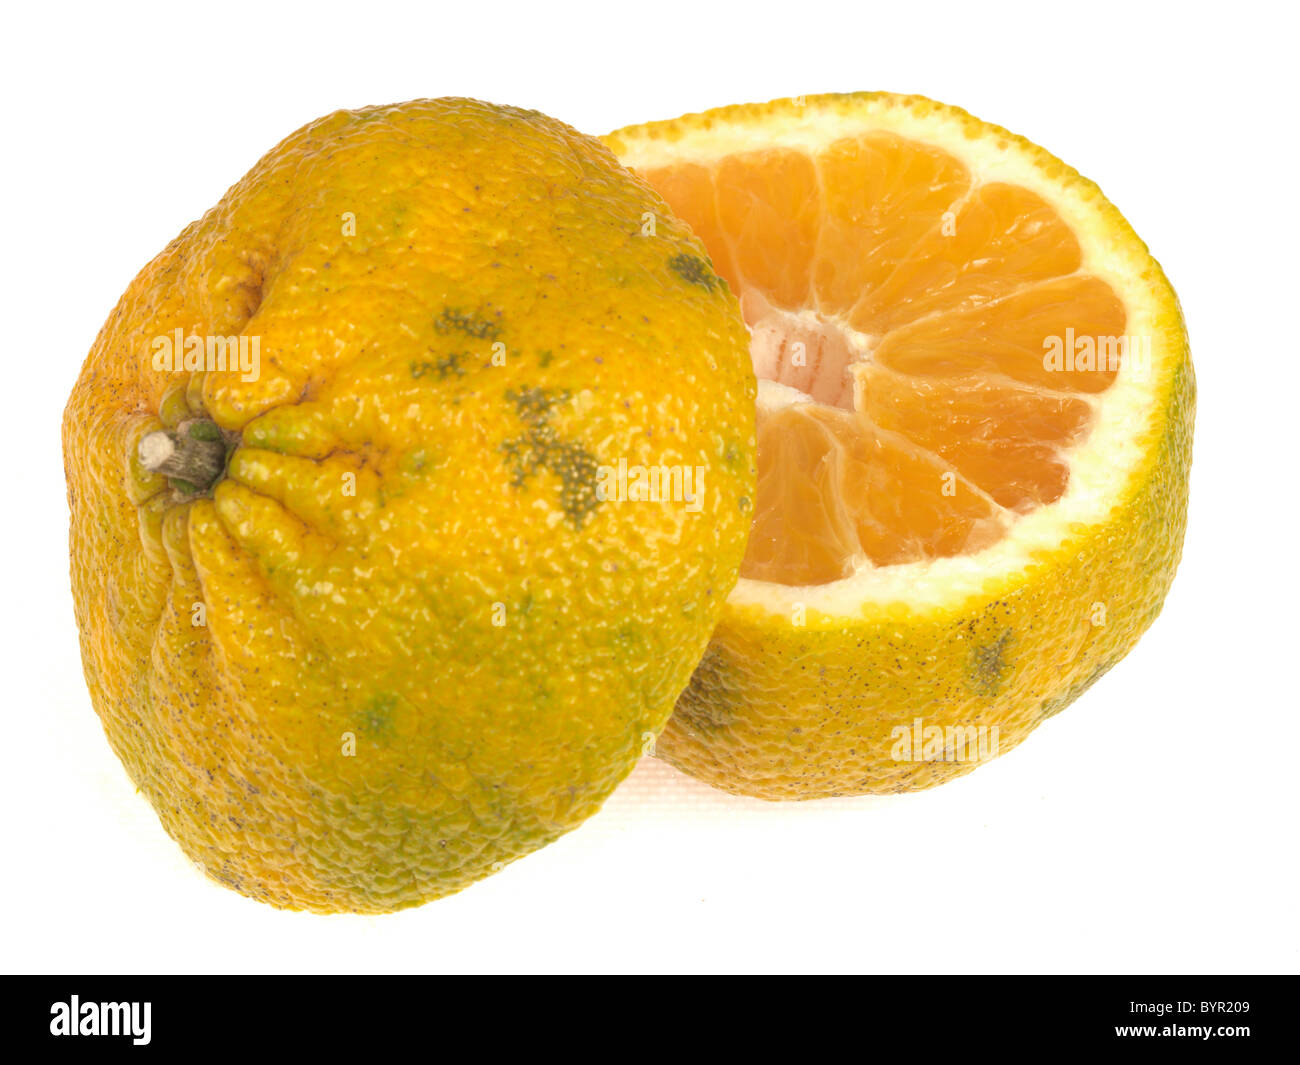 Fresh Healthy Ugli Fruit Against A White Background With A Clipping Path And No People Stock Photo